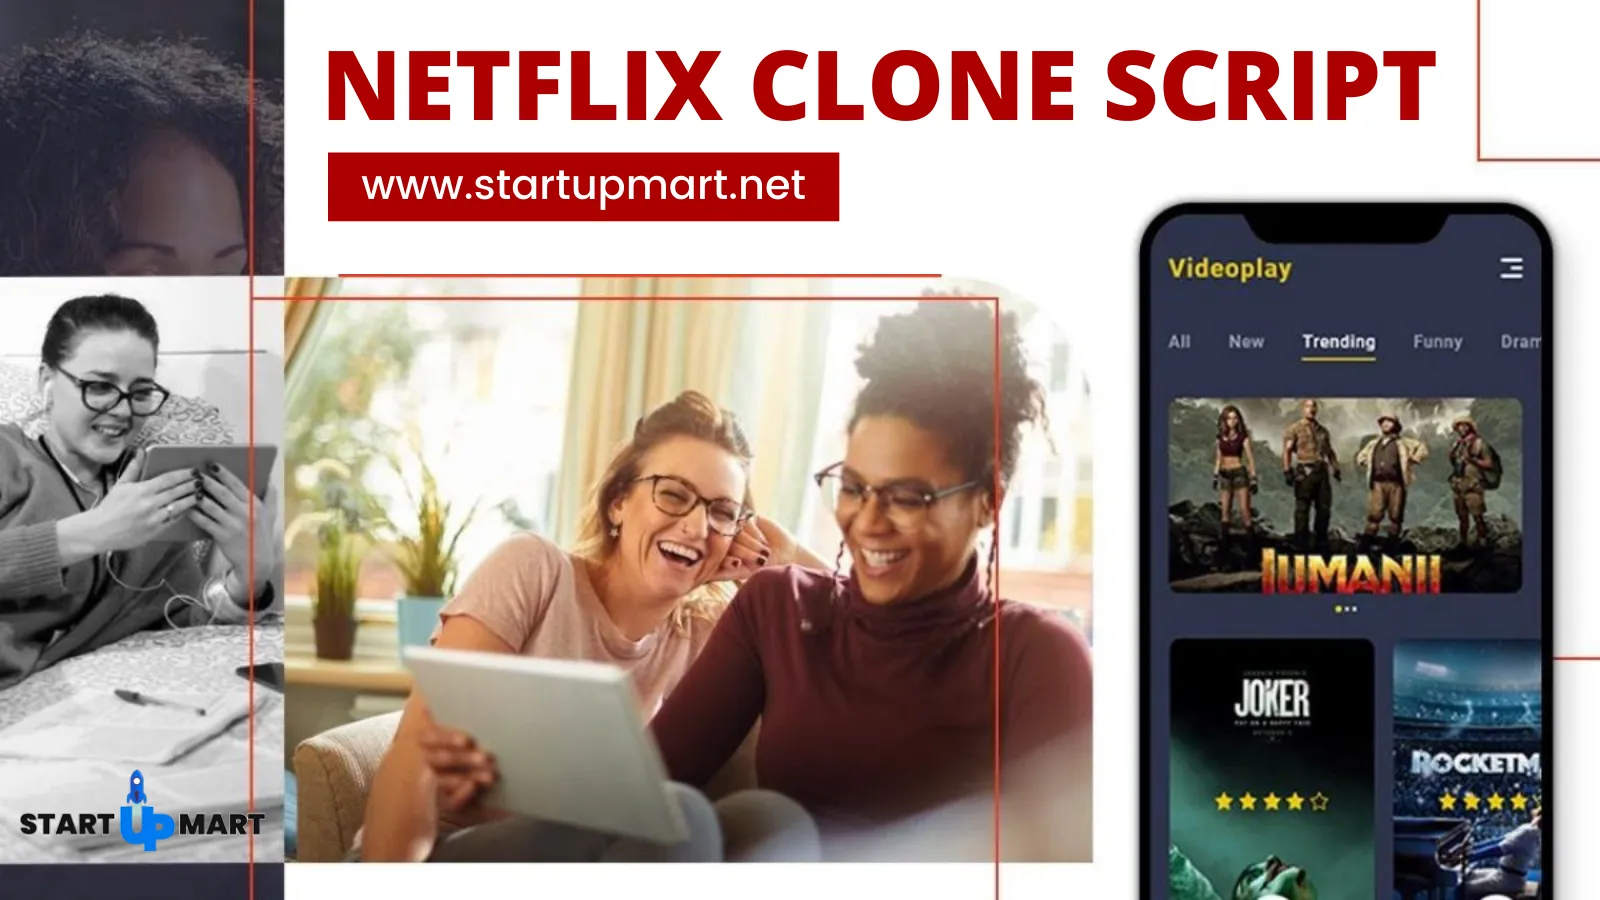 Unveil the Online Video Streaming Services with your Startup through Netflix Clone App